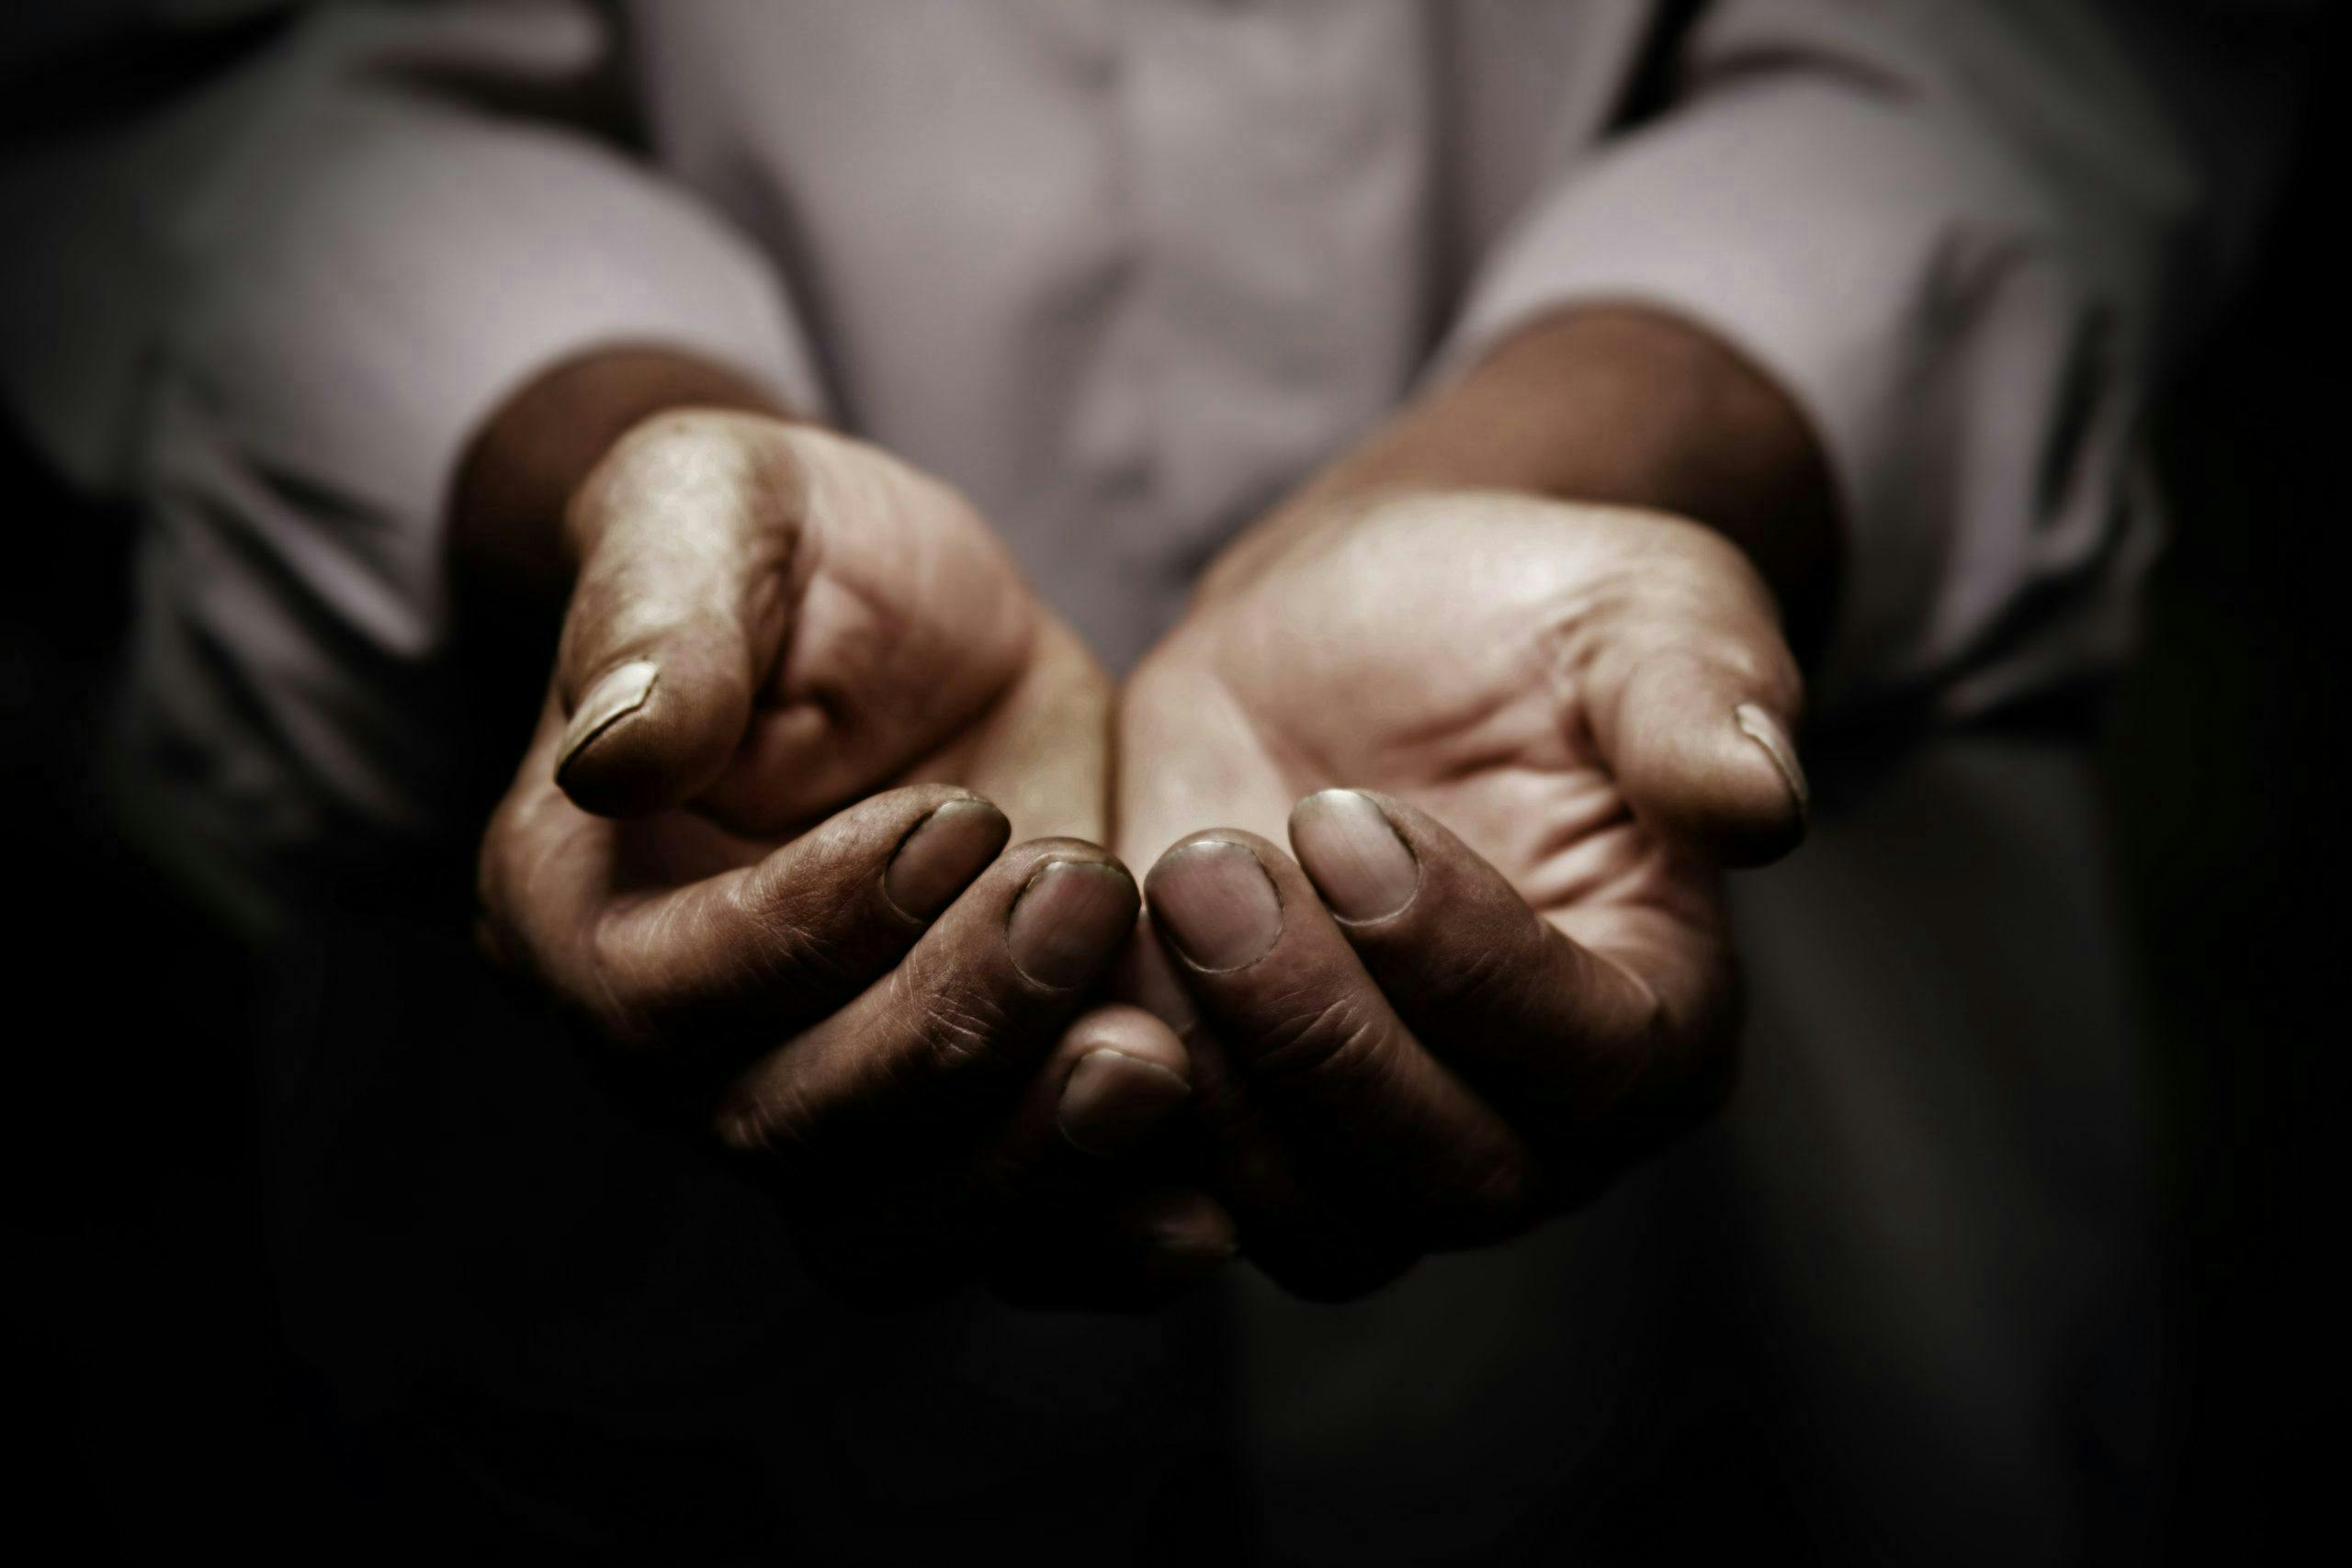 Worn hands are extended in a cupping gesture with palms facing up, set against a dark, blurred background, emphasizing the texture and appearance of the hands.